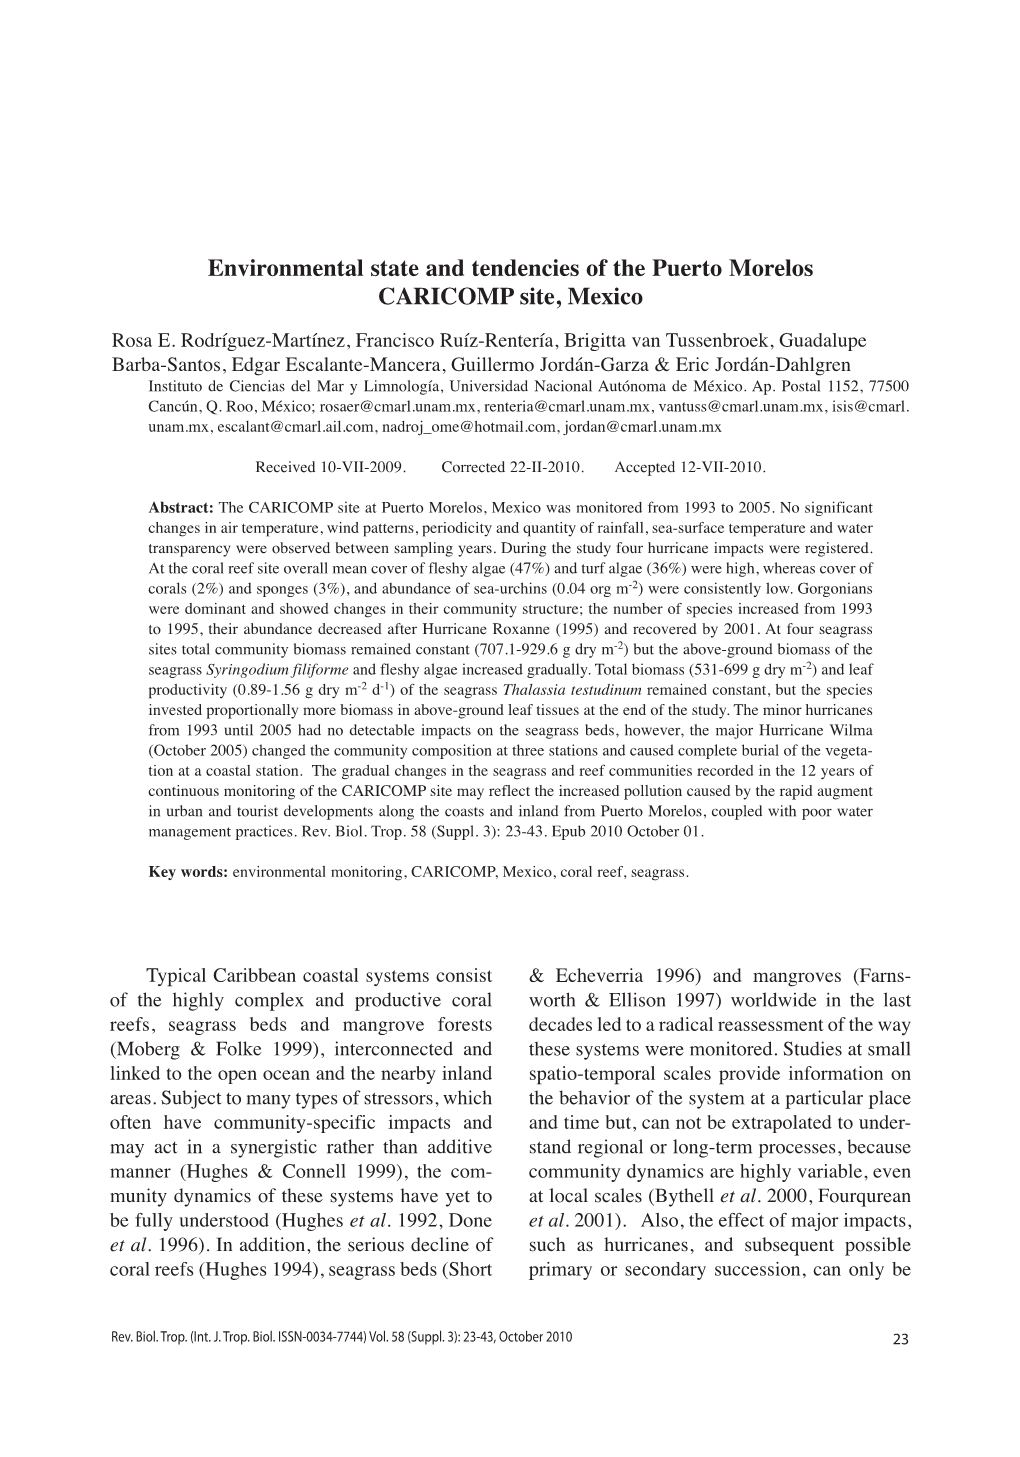 Environmental State and Tendencies of the Puerto Morelos CARICOMP Site, Mexico